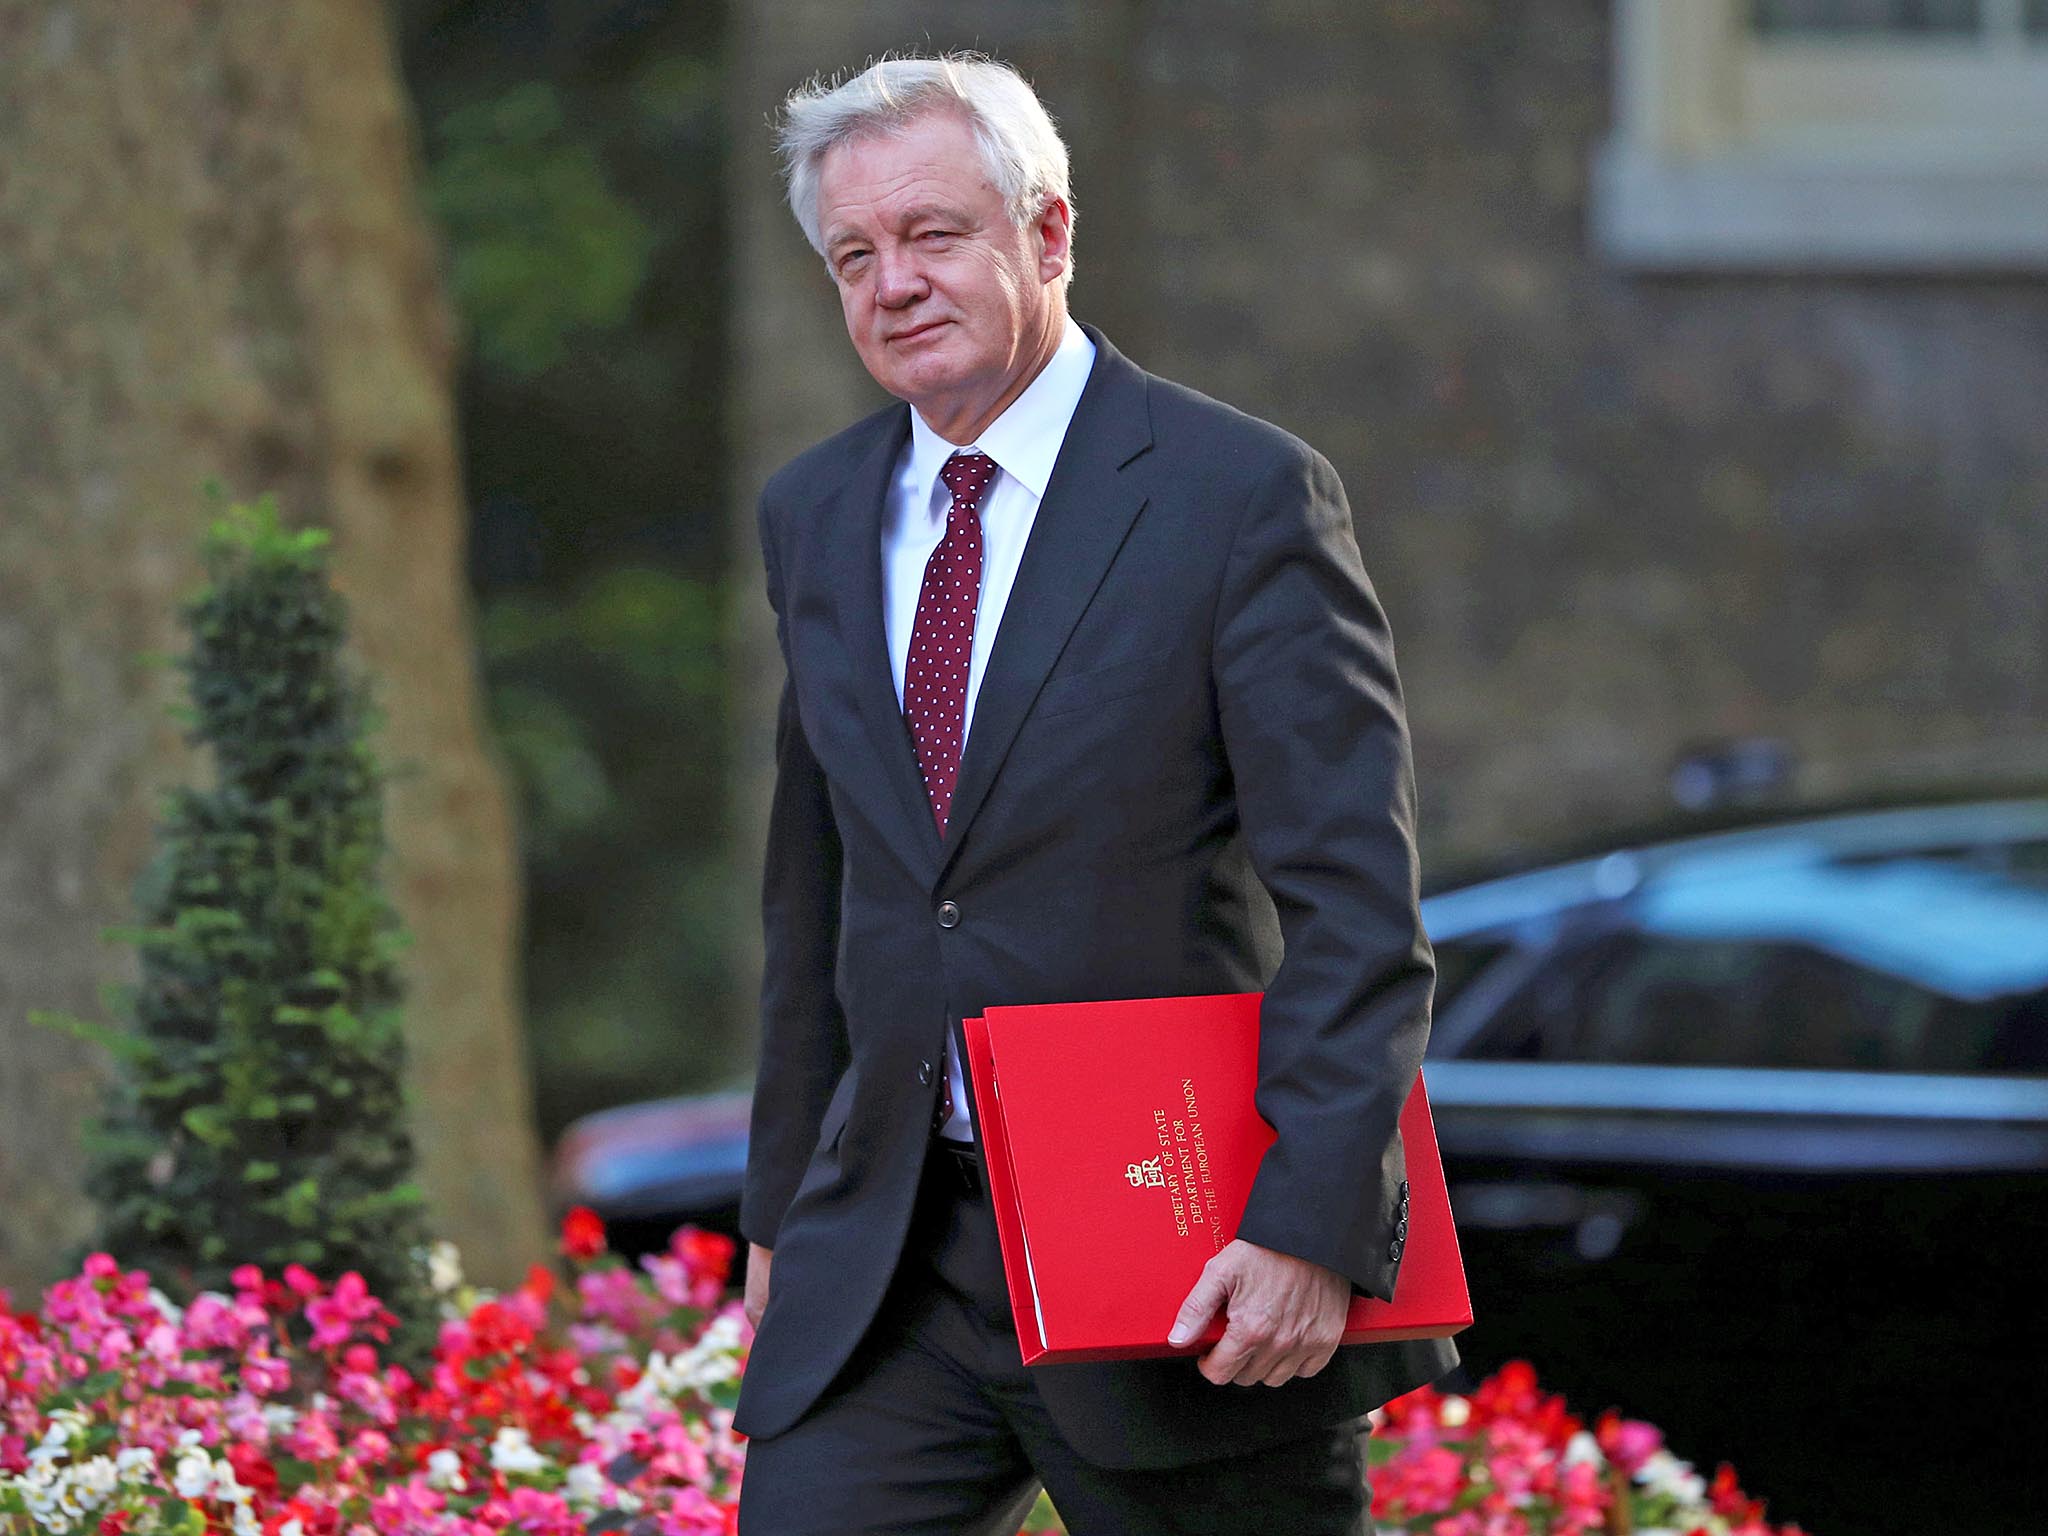 Brexit Secretary David Davis said applications for settled status would be streamlined